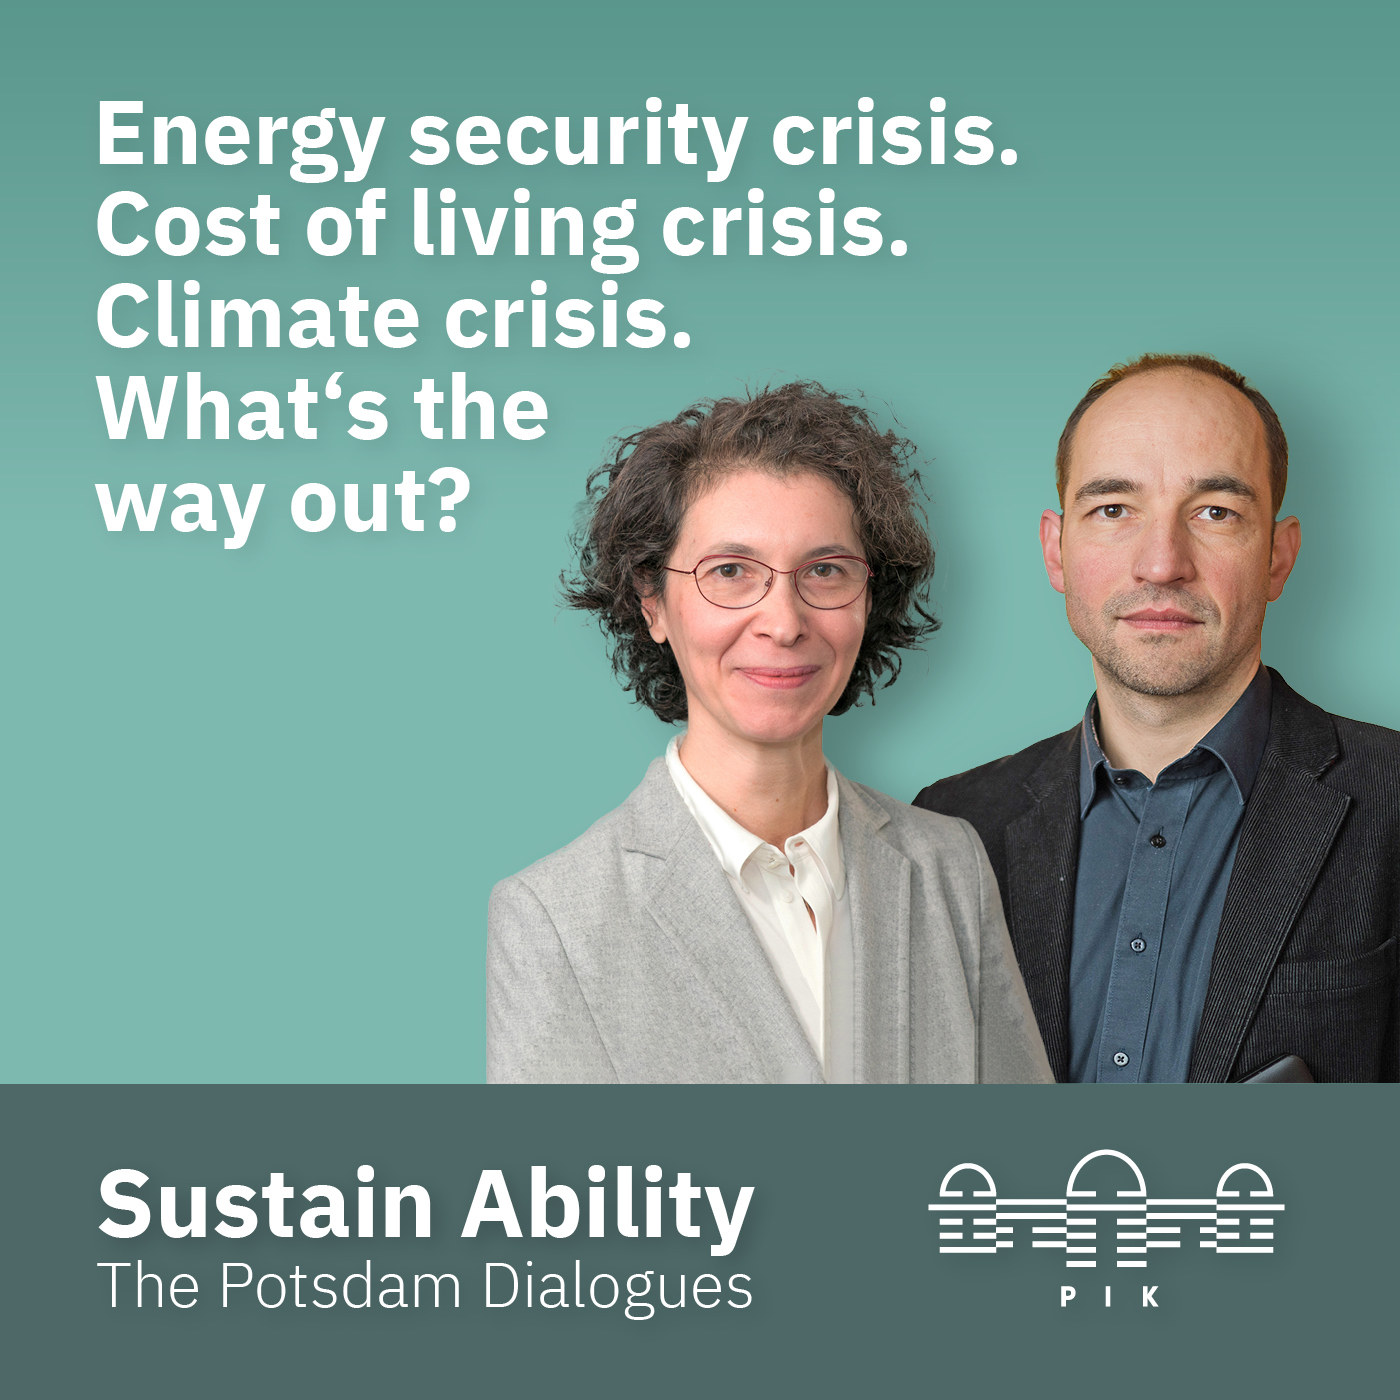 Sustain Ability. The Potsdam Dialogues - Science for a Safe Tomorrow. Episode 5: Energy security crisis. Cost of living crisis. Climate Crisis. What's the way out?